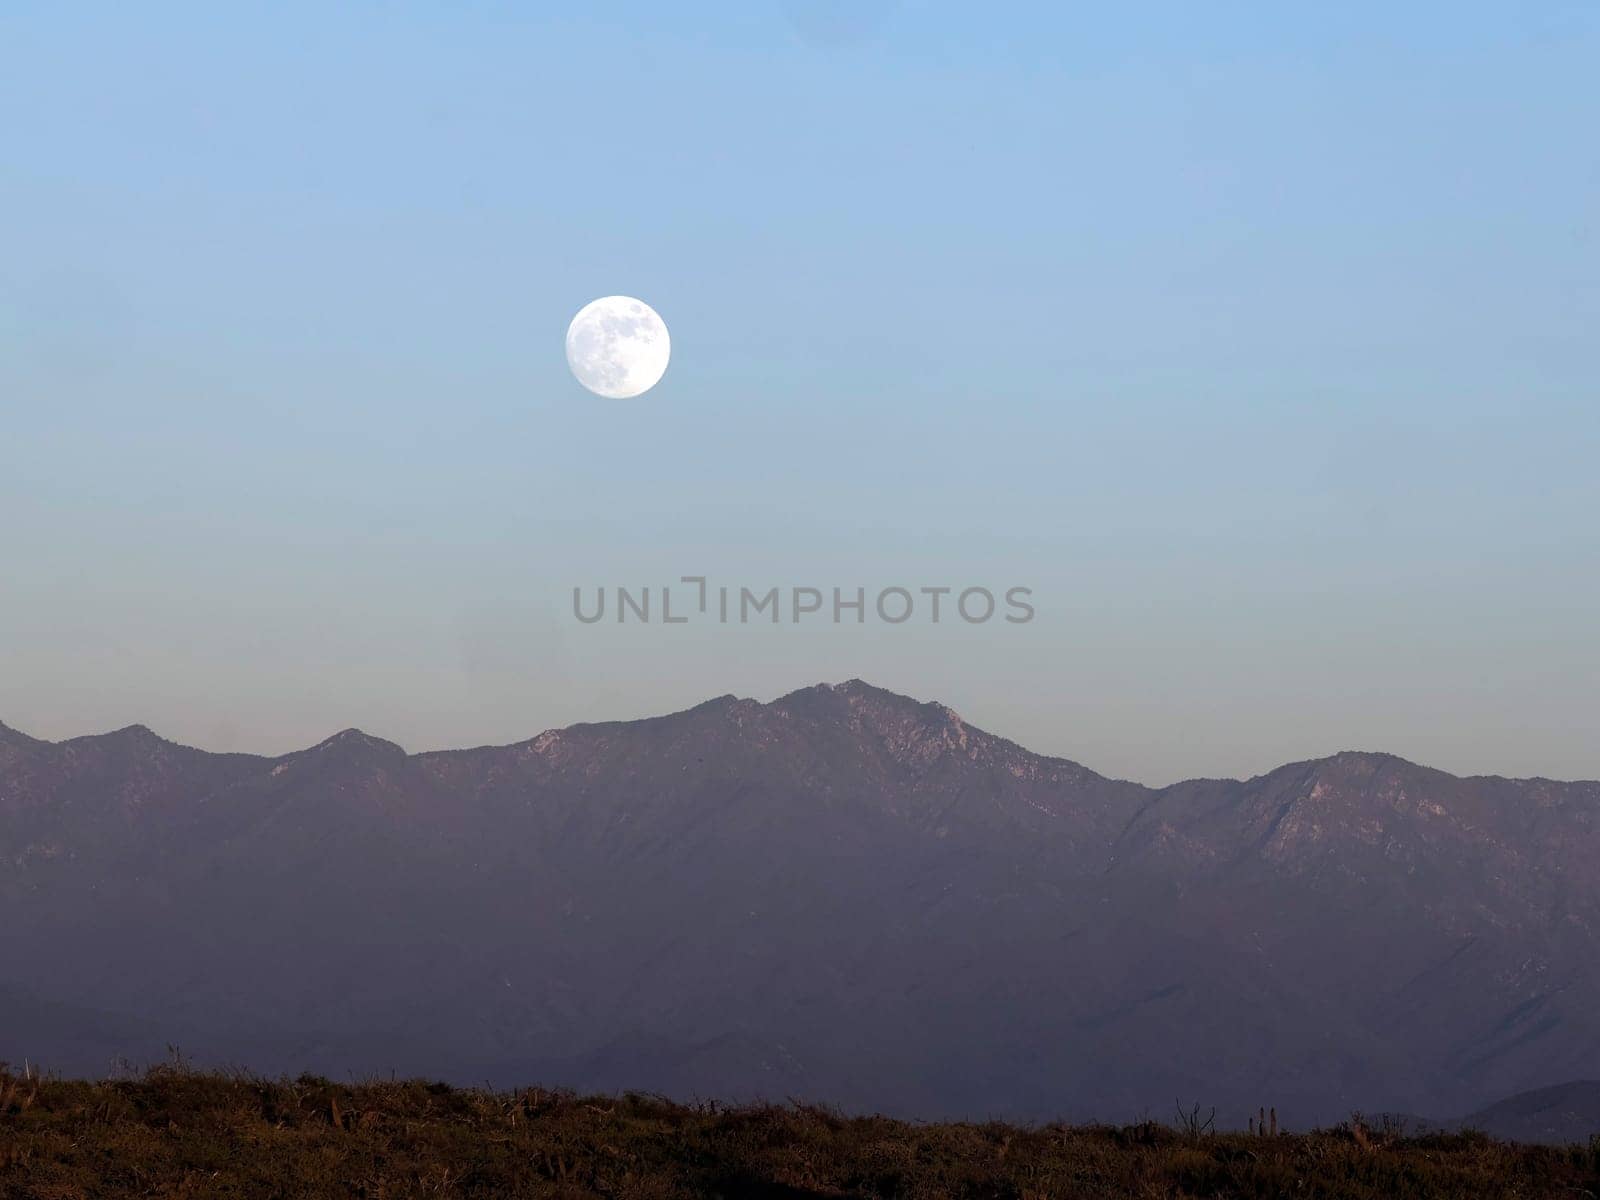 full moon after sunset in todos santos mexico baja california sur by AndreaIzzotti